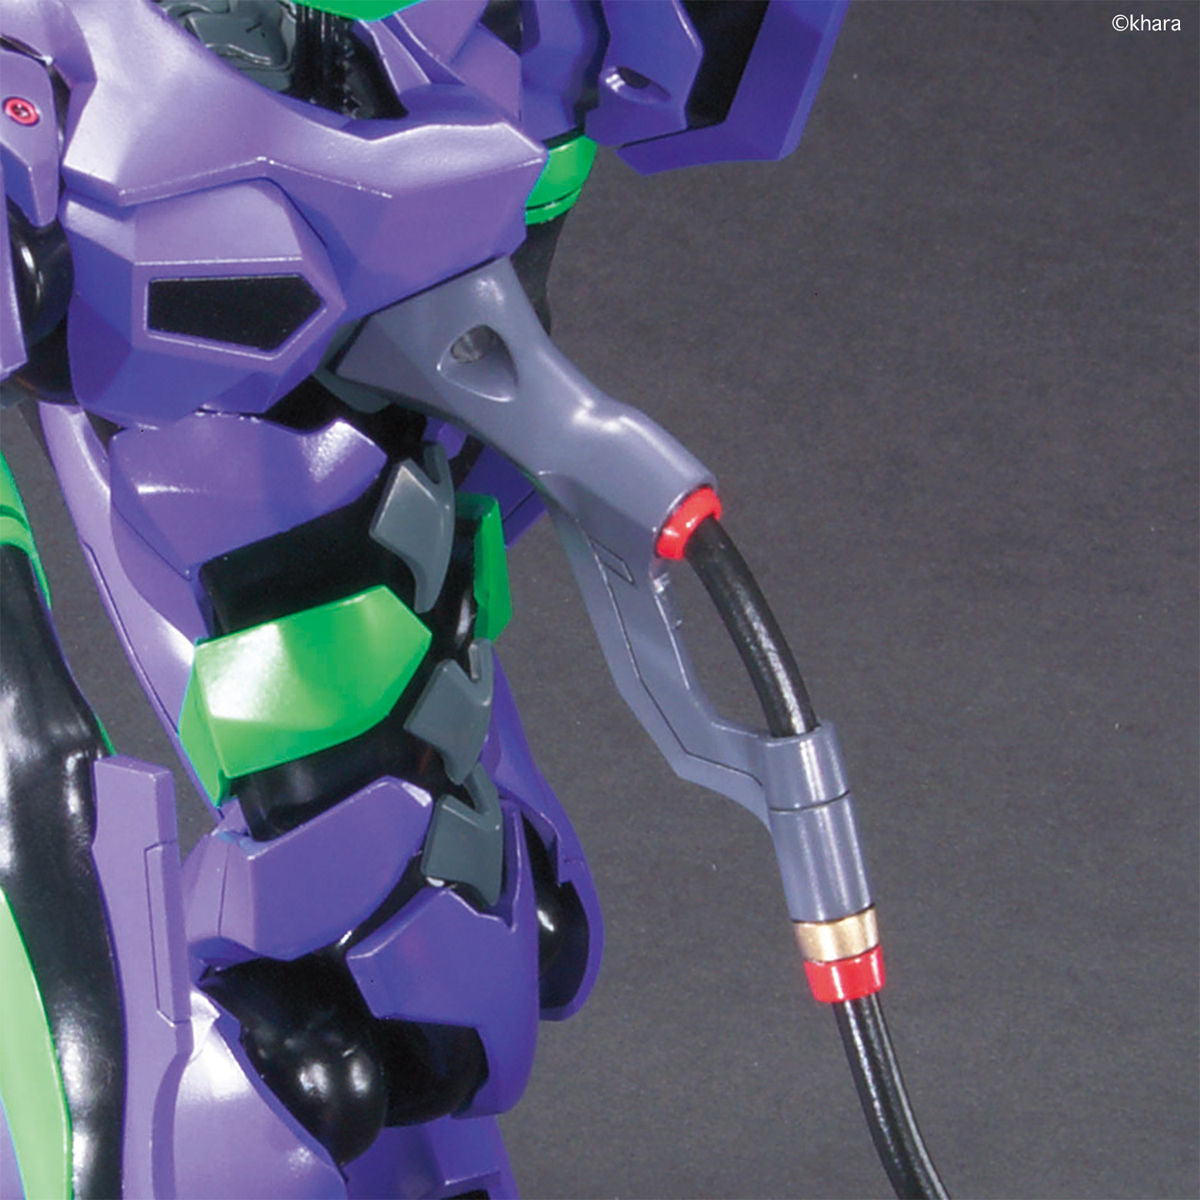 Evangelion - Unit-01 - LMHG New Theatrical Edition Model Kit, includes 2 progressive knives, 1 palette rifle, and 1 umbilical cable, sold by Nippon Figures